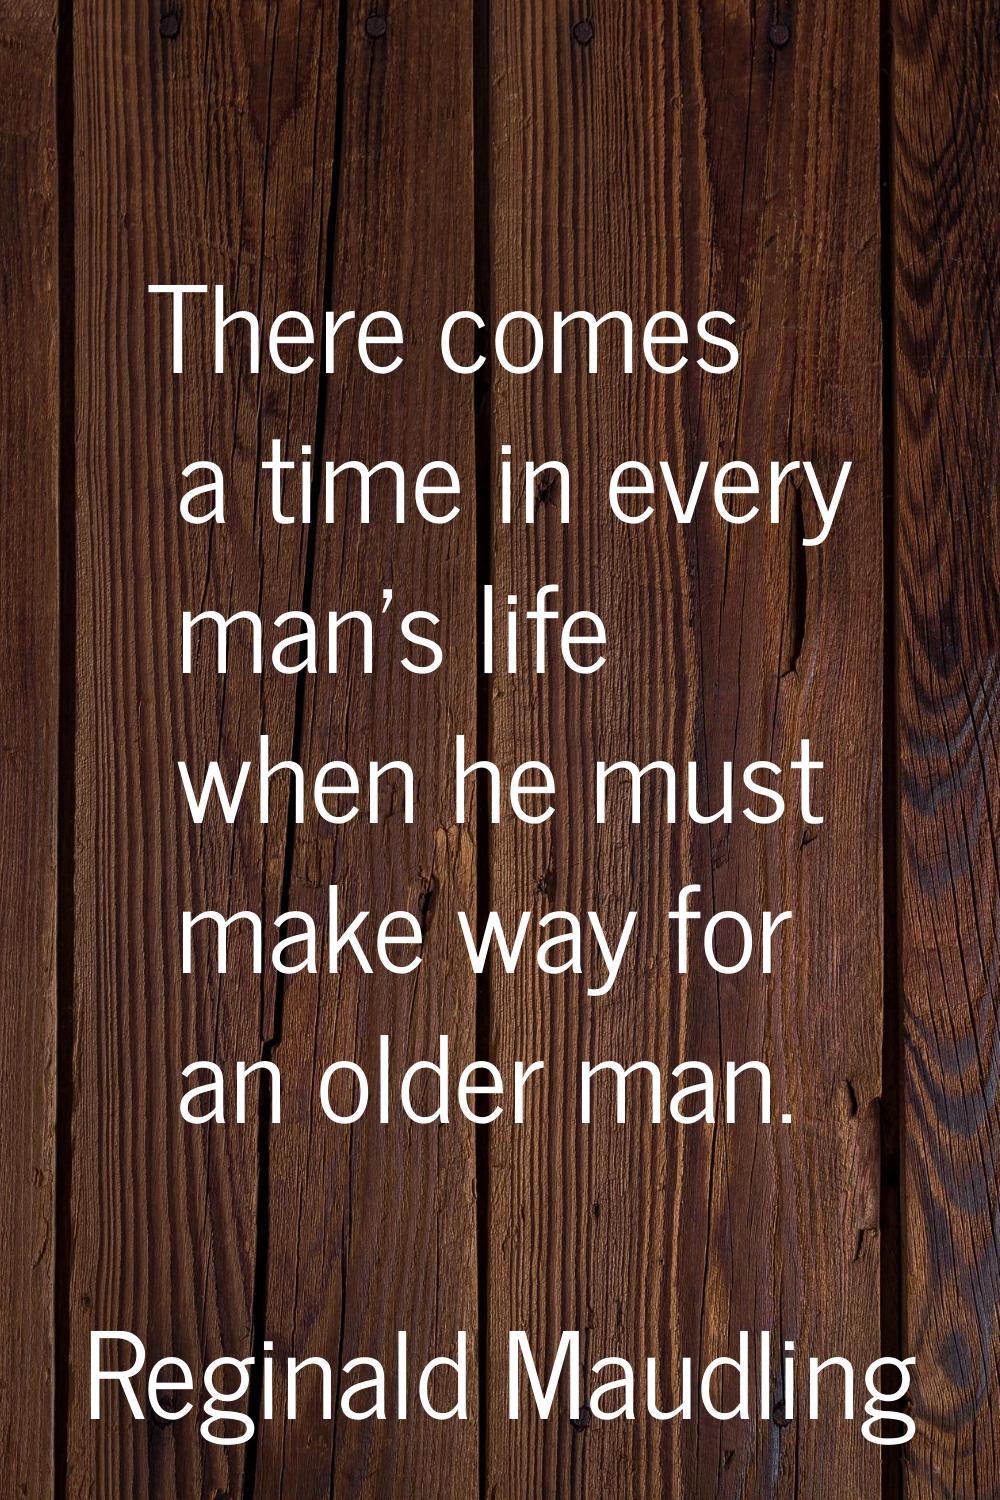 There comes a time in every man's life when he must make way for an older man.